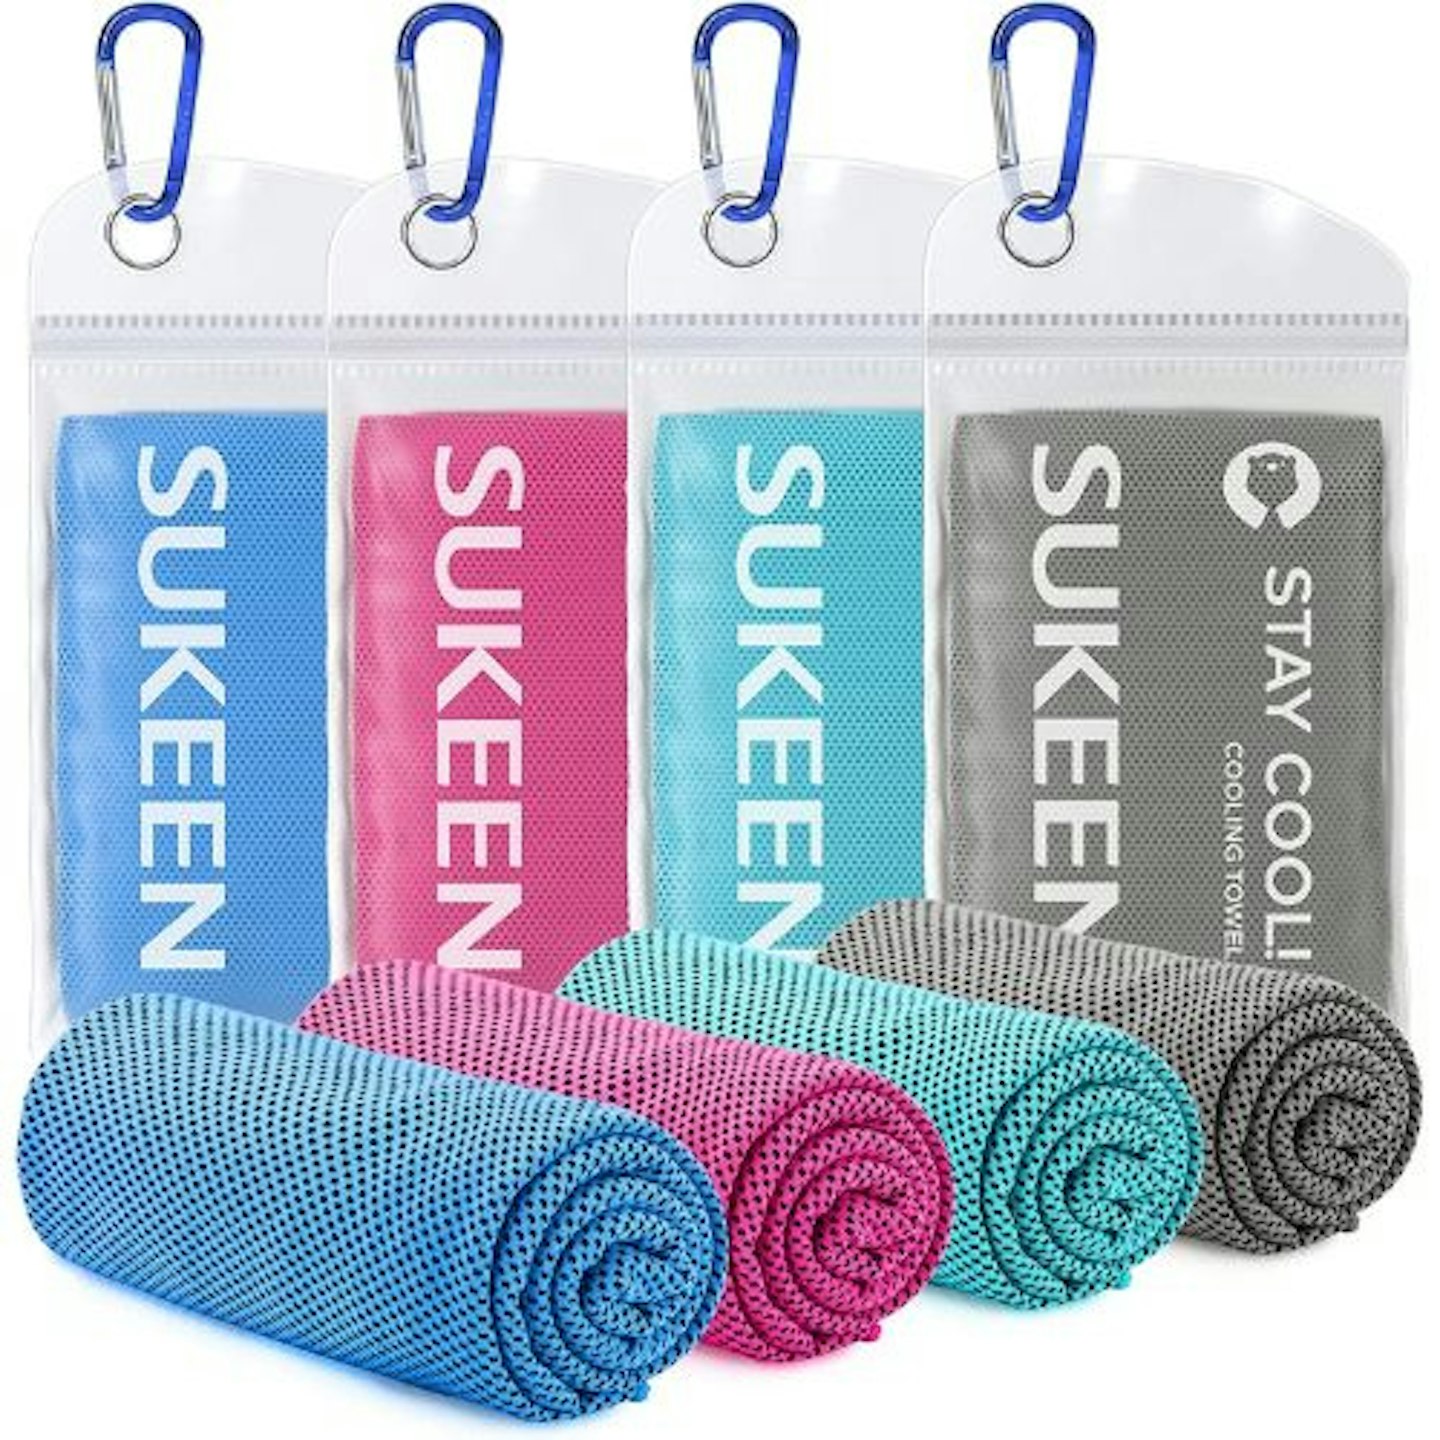 9 Latest Collection of Gym Towels For Sweat Swapping